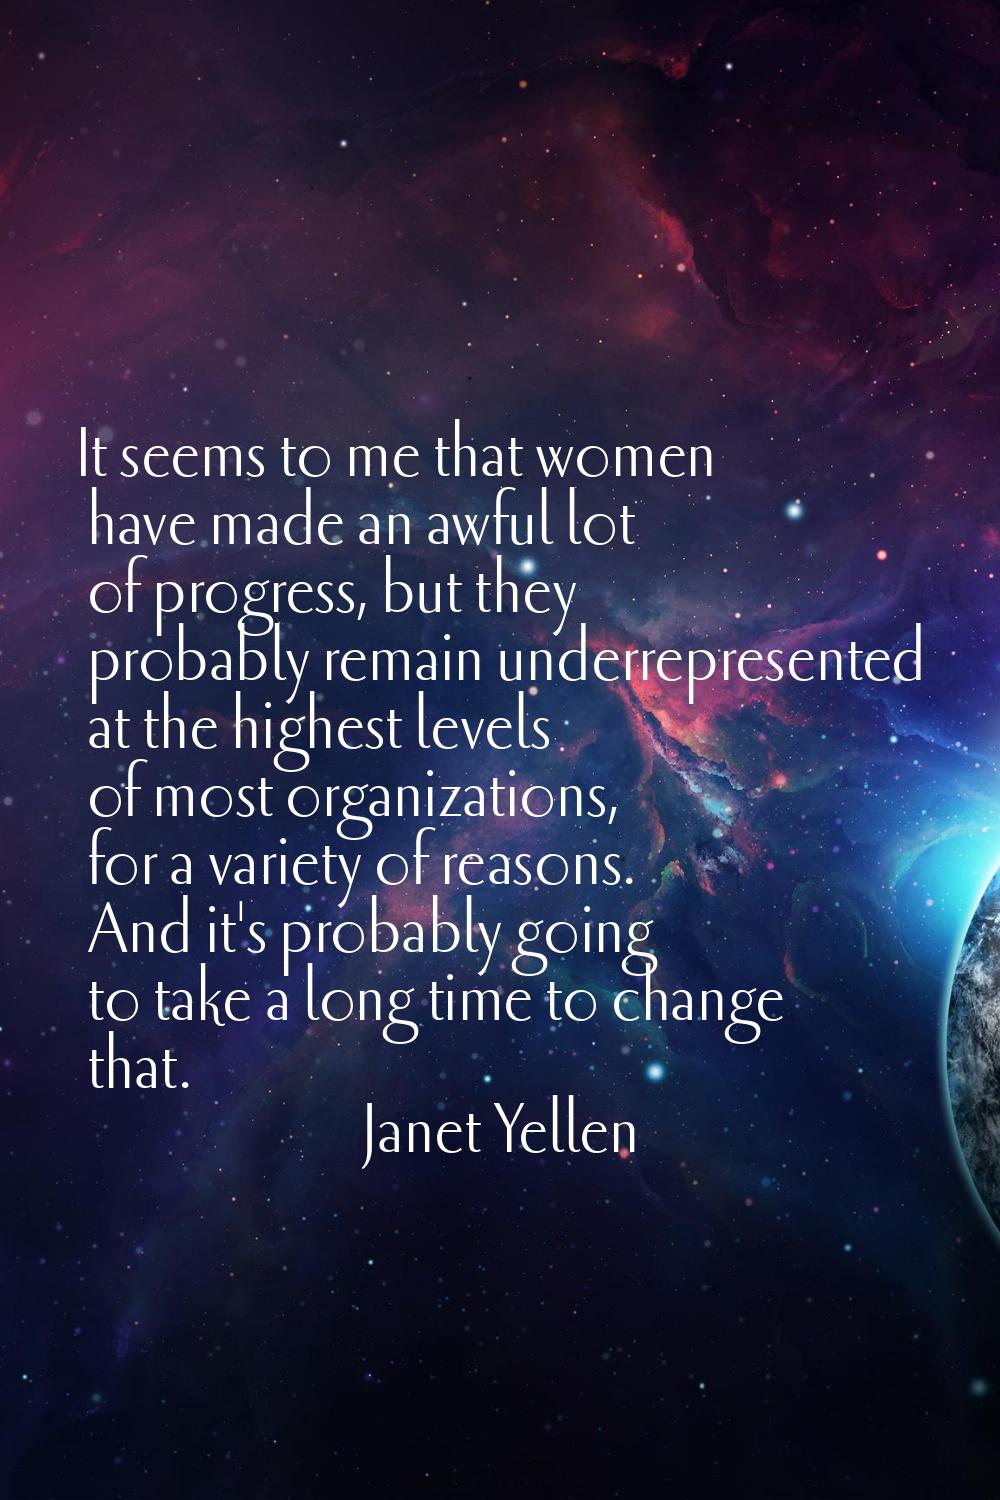 It seems to me that women have made an awful lot of progress, but they probably remain underreprese